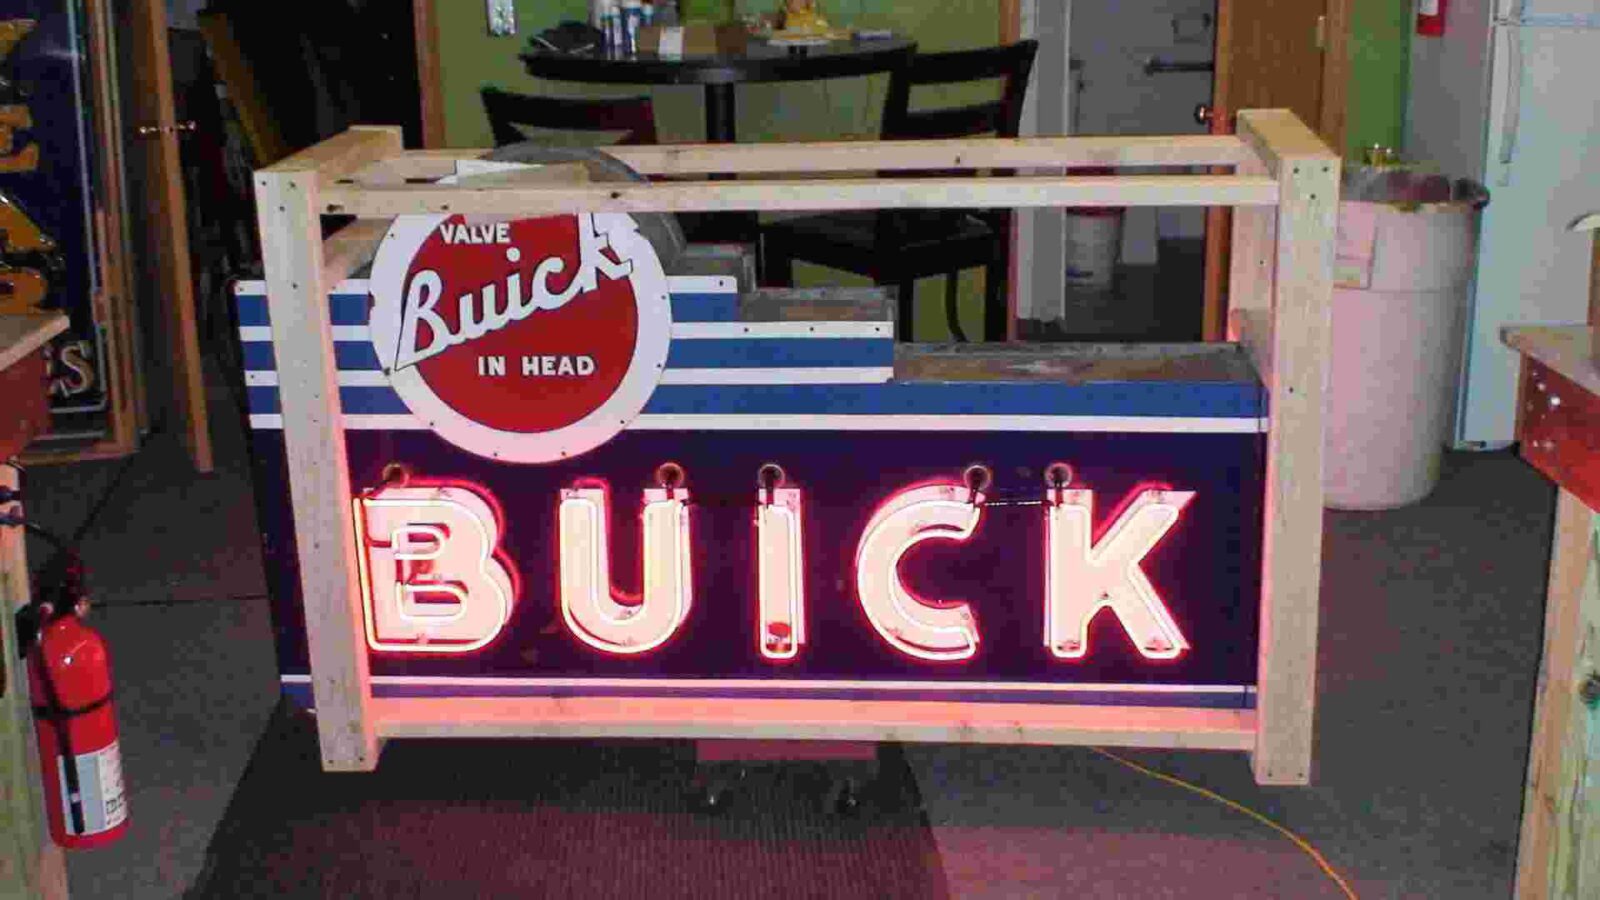 signs neon sign buick porcelain antique album advertising metal roadrelics 1950 sided redhot clocks glass wood letters